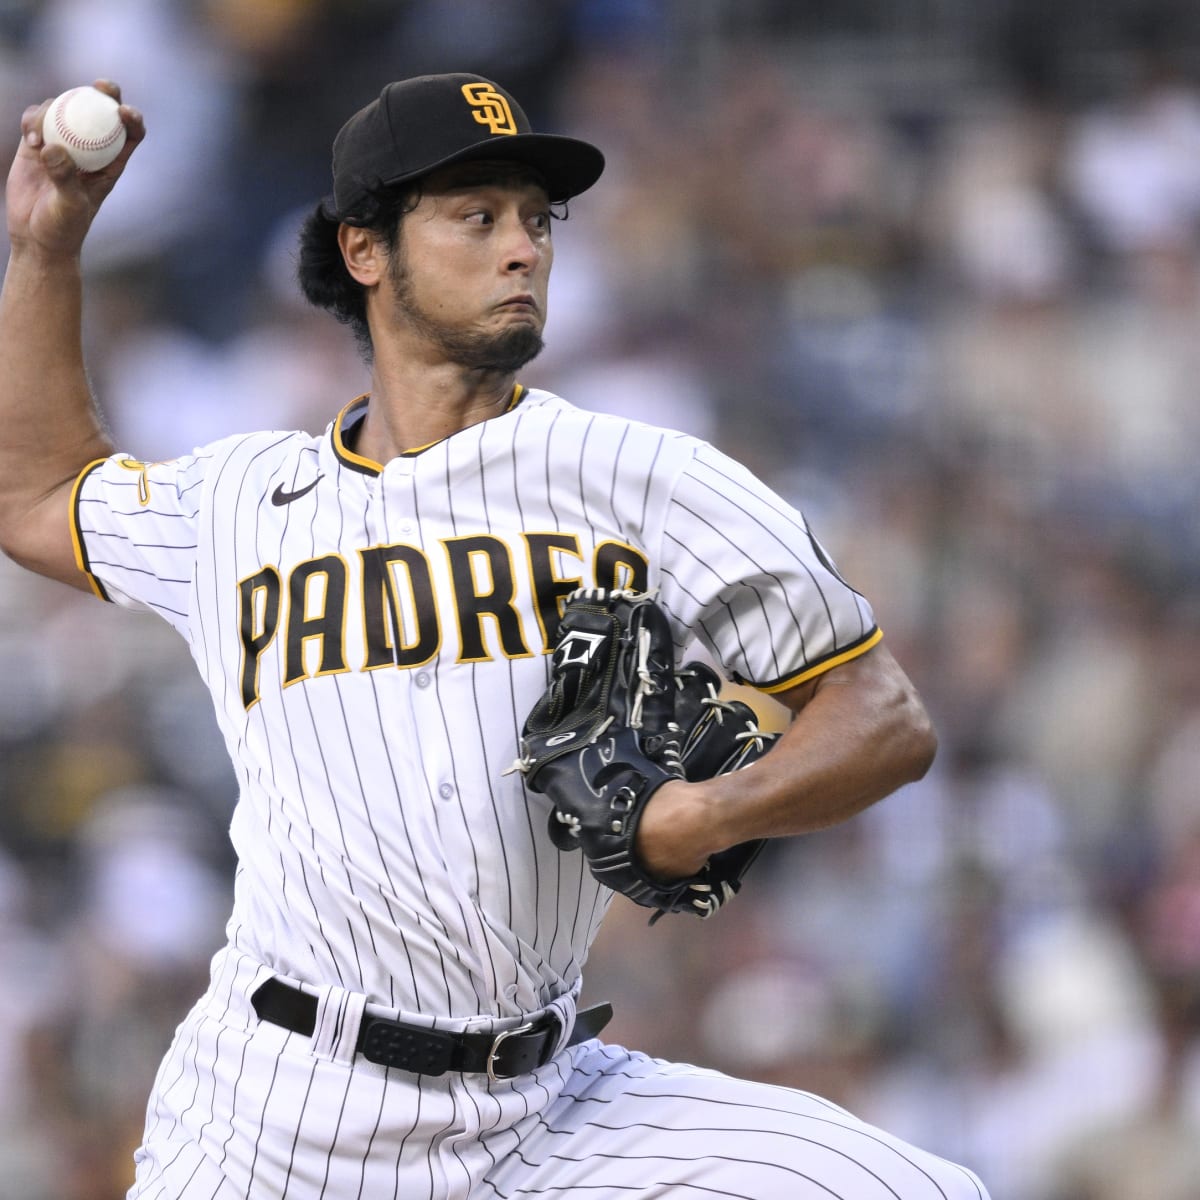 Under new border restrictions, Yu Darvish's father might not be